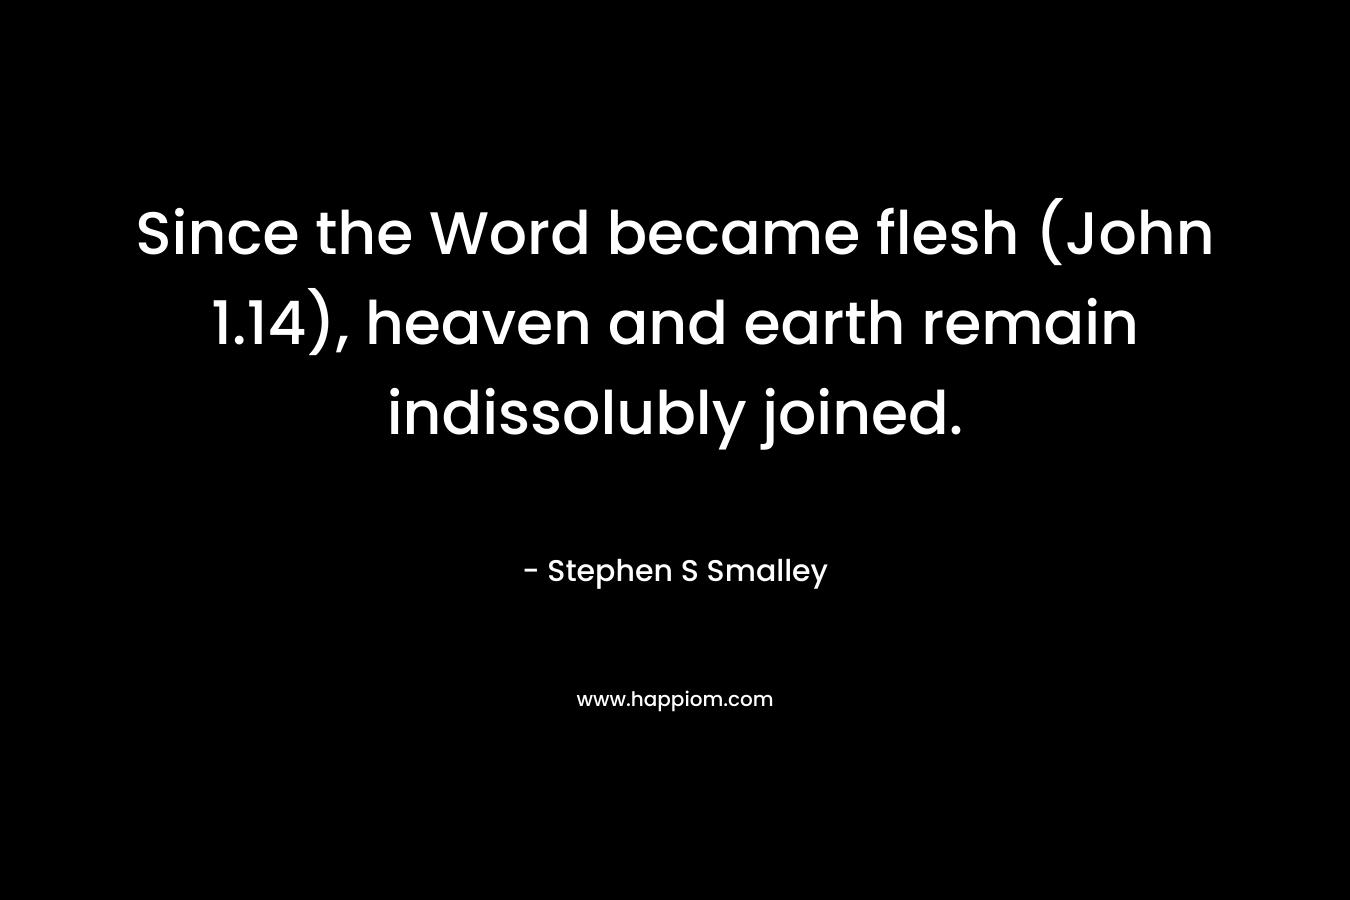 Since the Word became flesh (John 1.14), heaven and earth remain indissolubly joined.